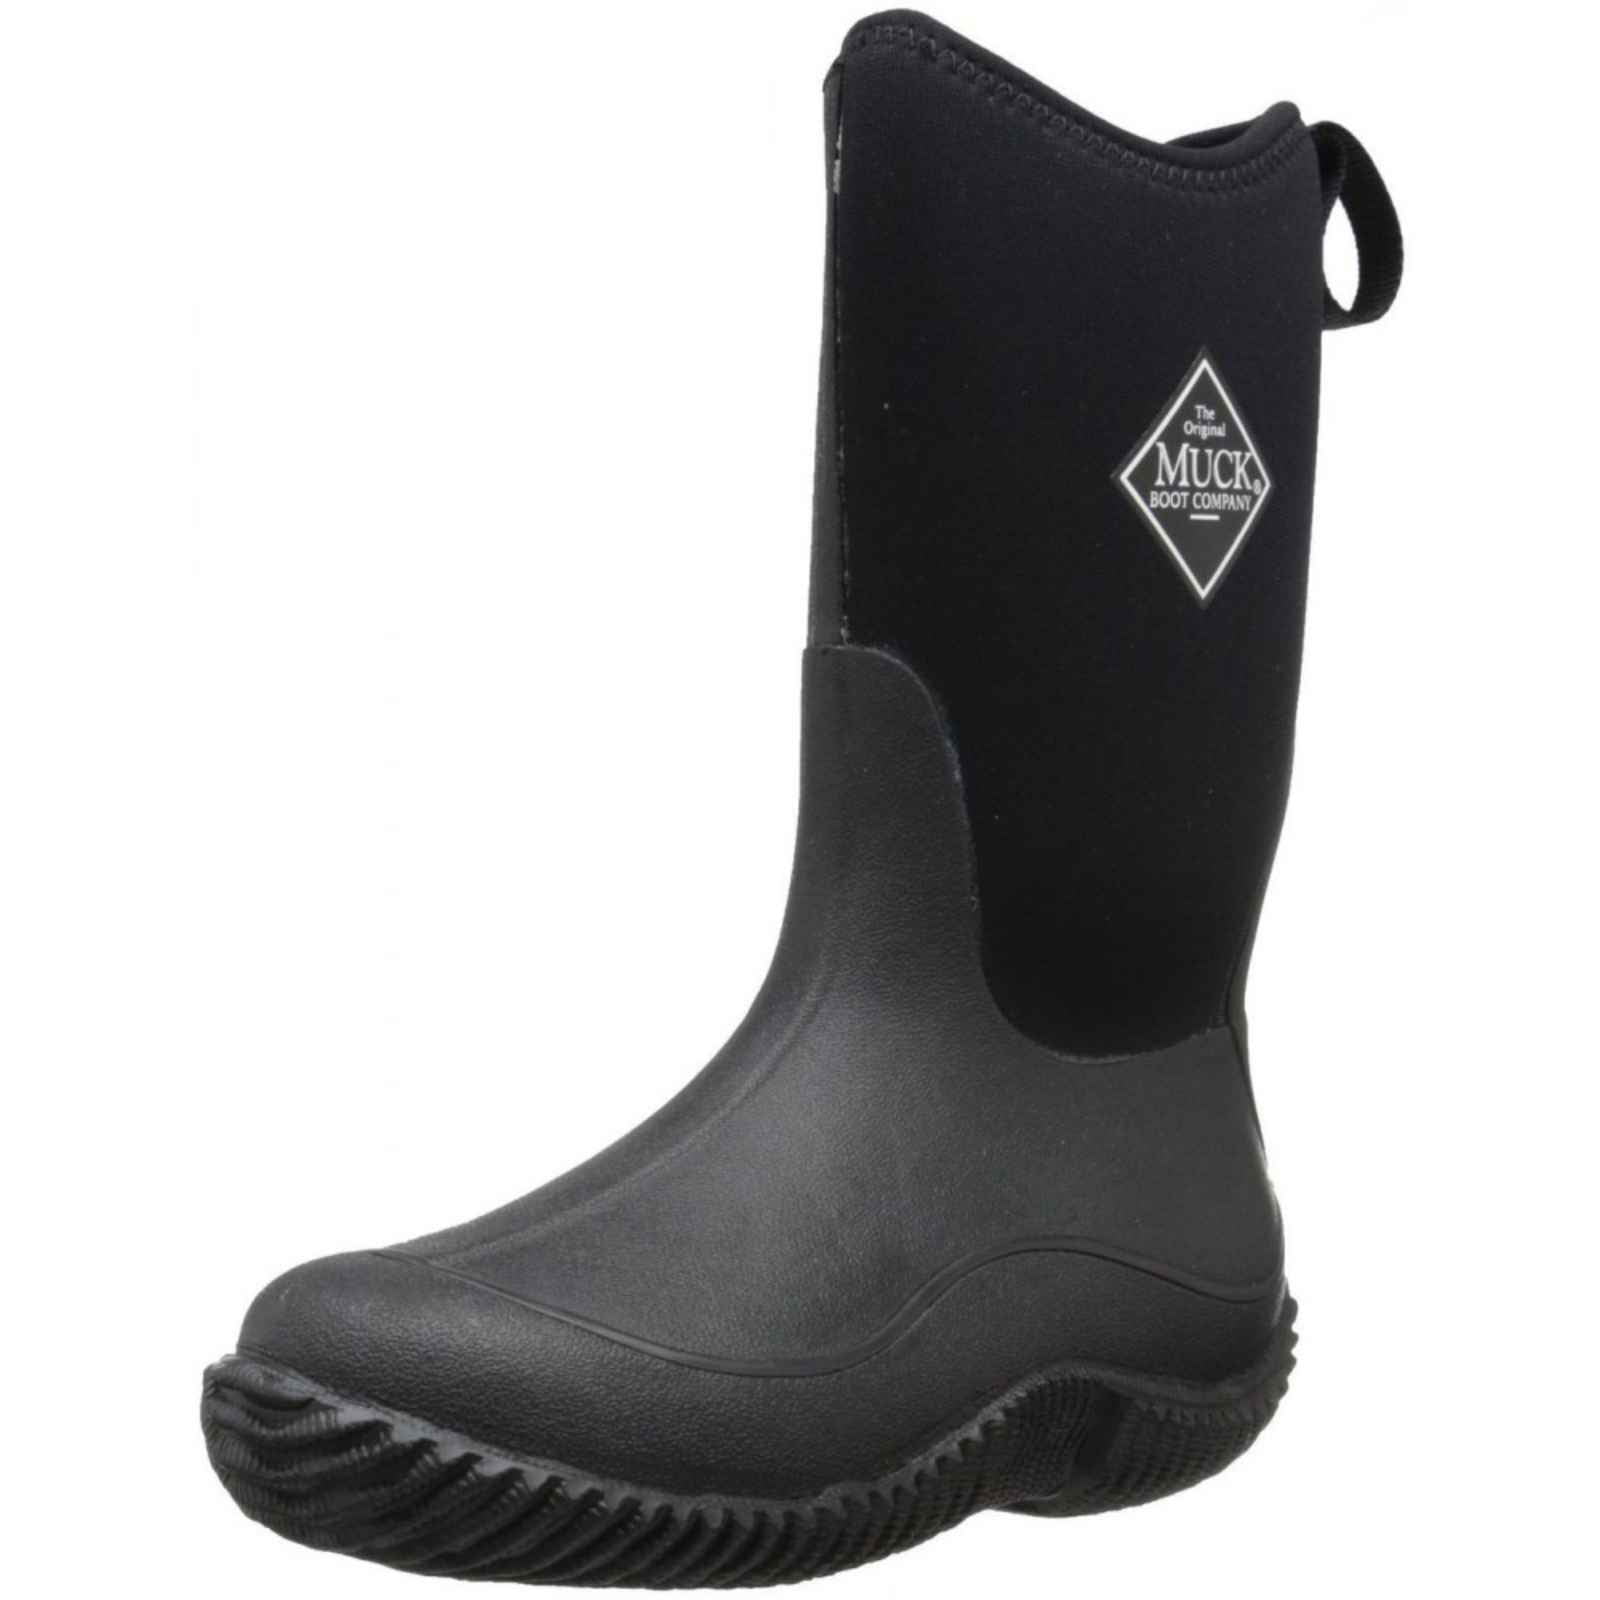 Muck Boot Company - Muck KBH-000 Youth Hale Insulated Waterproof Winter ...